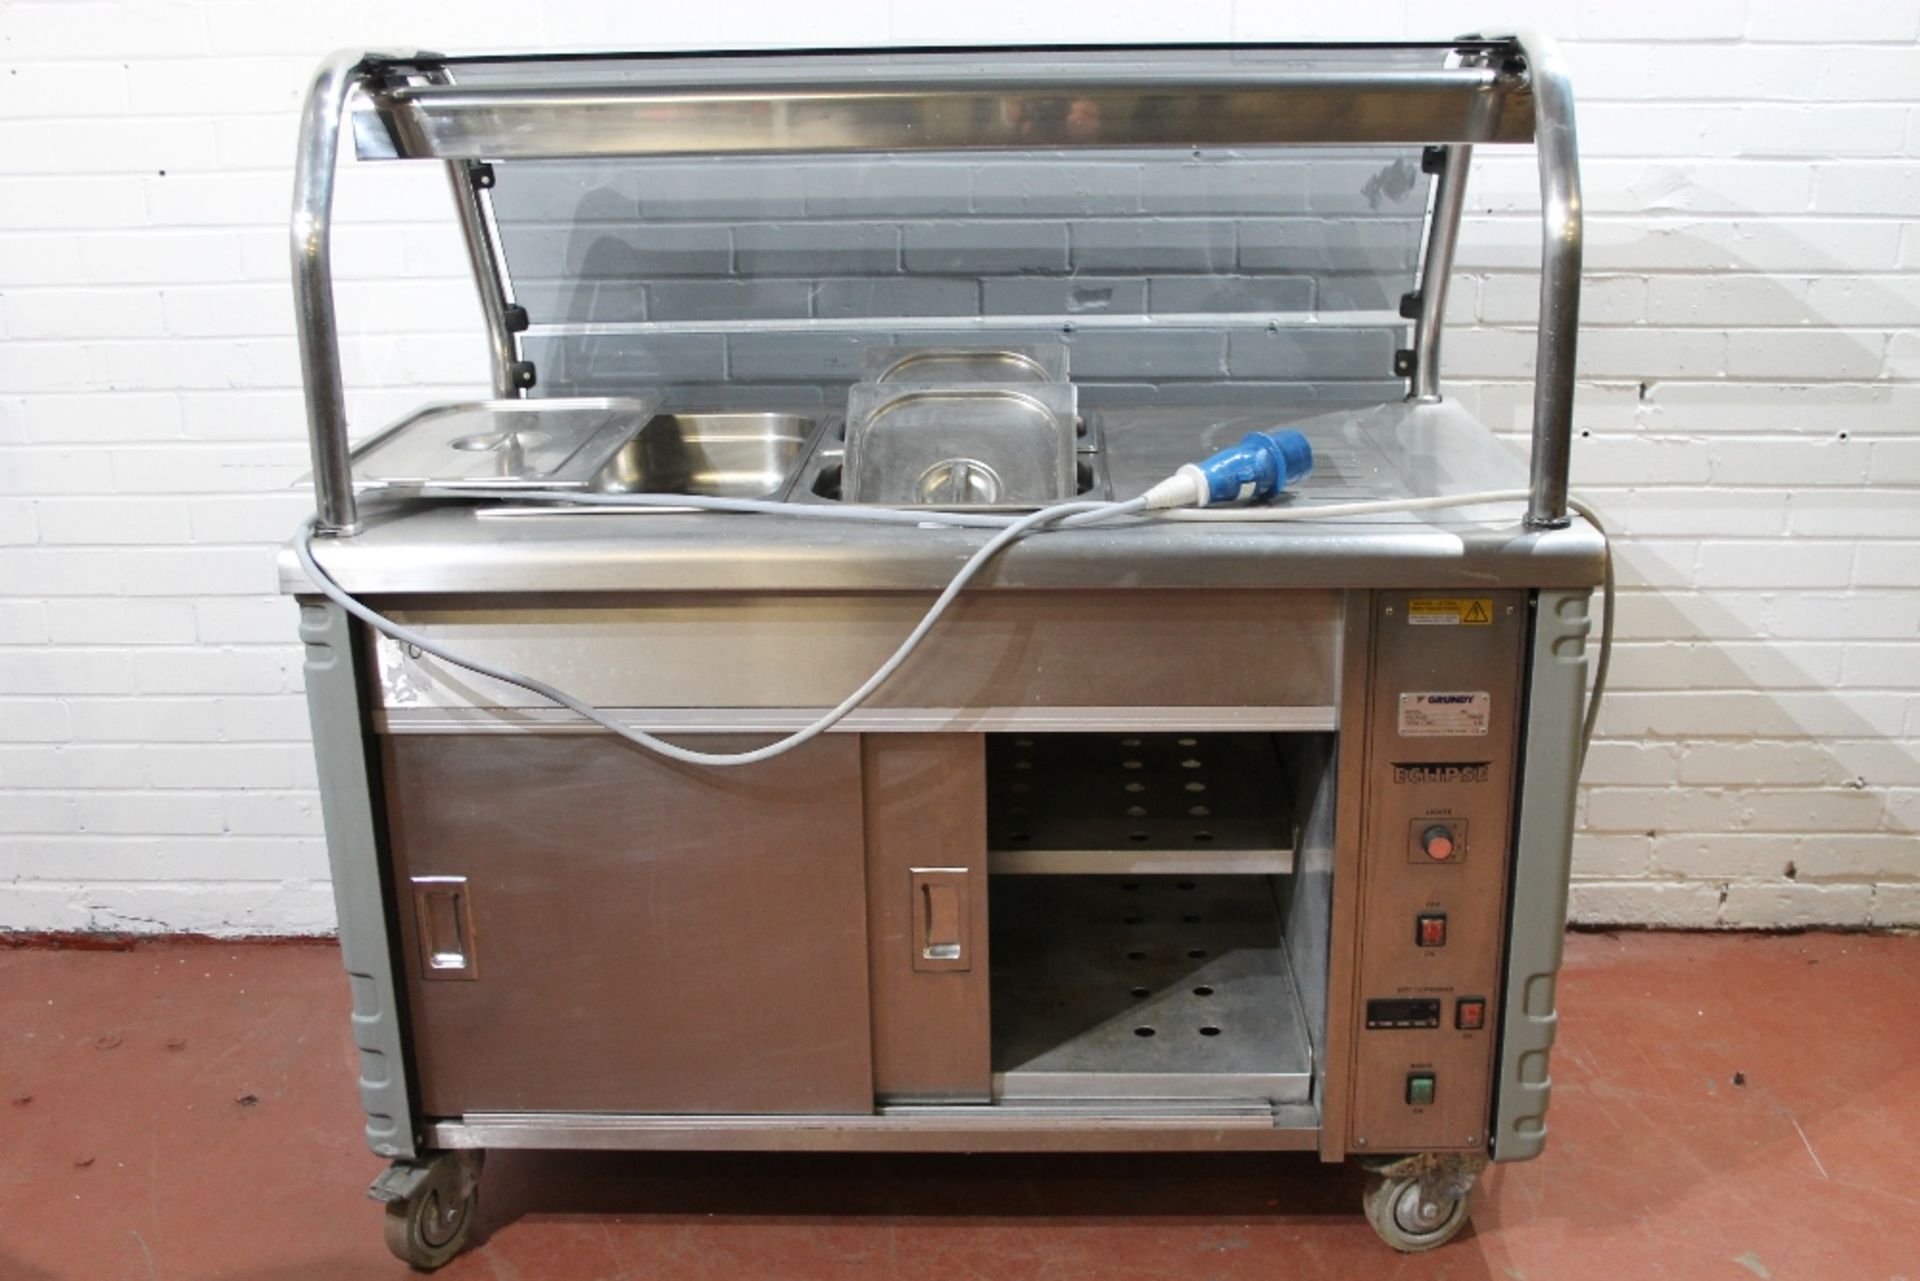 Grundy Mobile Bain Marie / Hot Food Servery with Gastro Pans – Model 91303 R11 – 3ph- Tested - Image 2 of 3